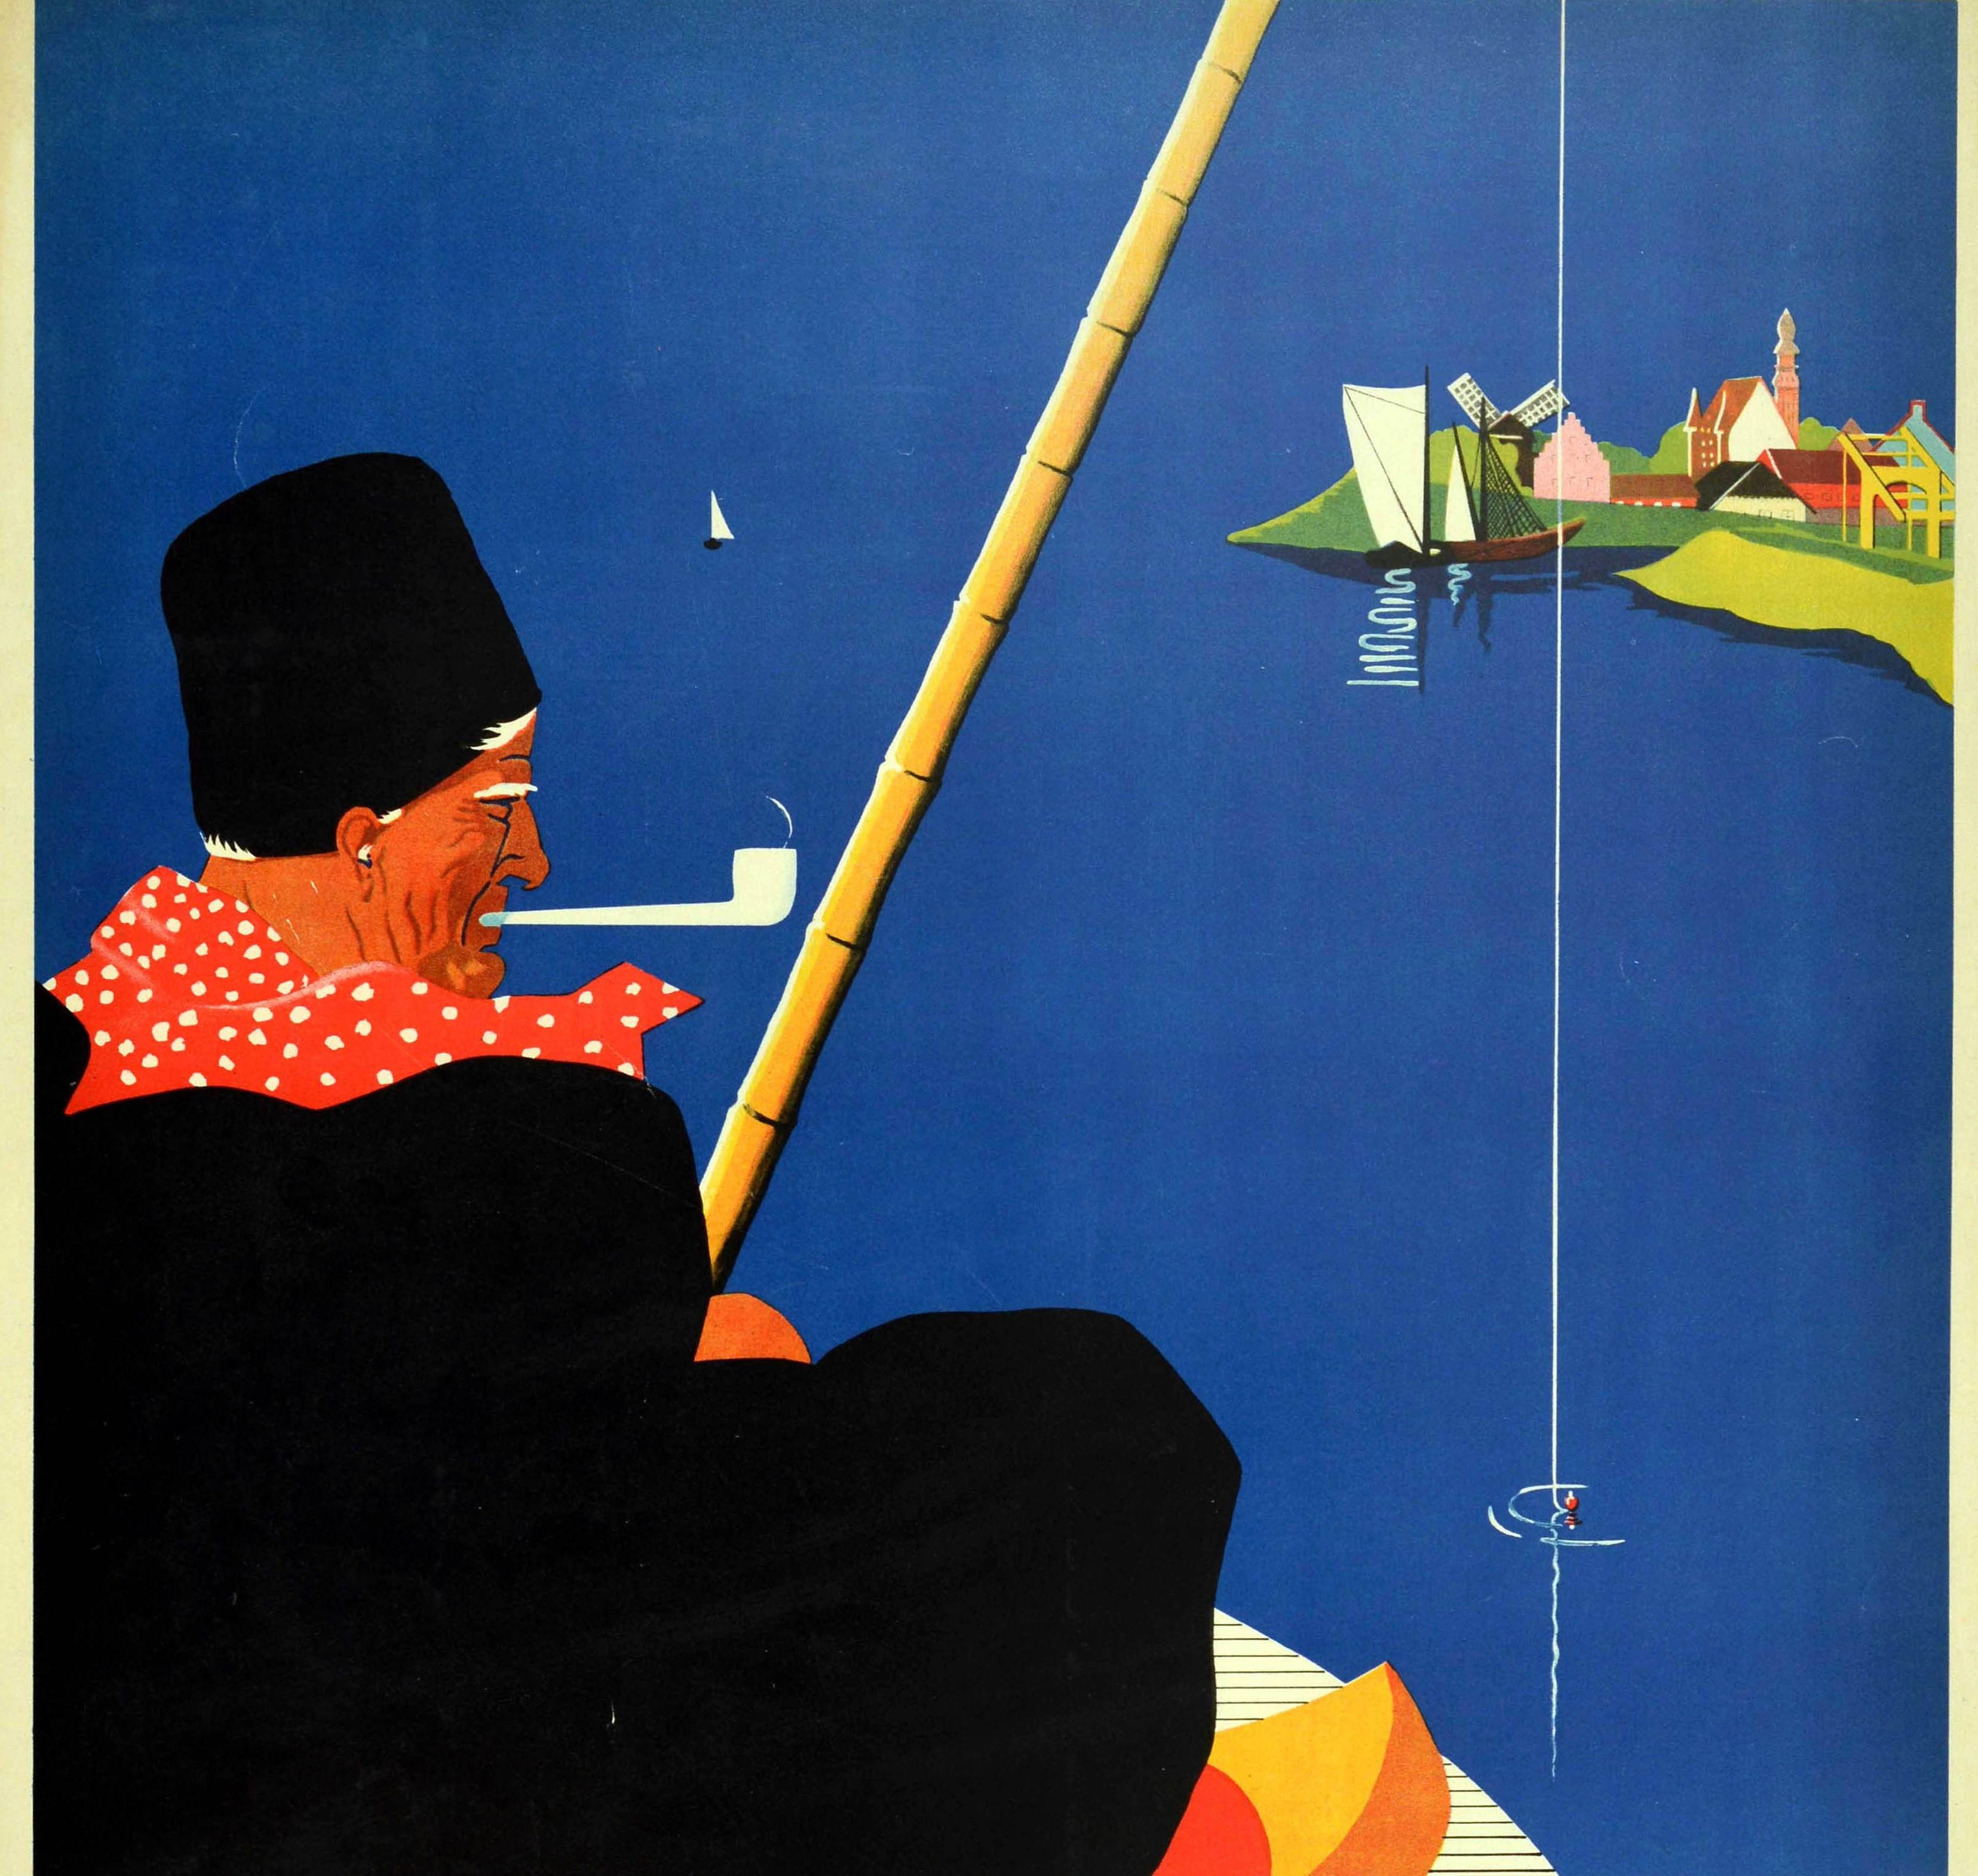 Original vintage travel poster for Holland featuring a great illustration of an elderly man wearing a black hat and red and white polka dot scarf smoking a pipe and fishing on calm blue water with sailing boats and a windmill next to houses in the